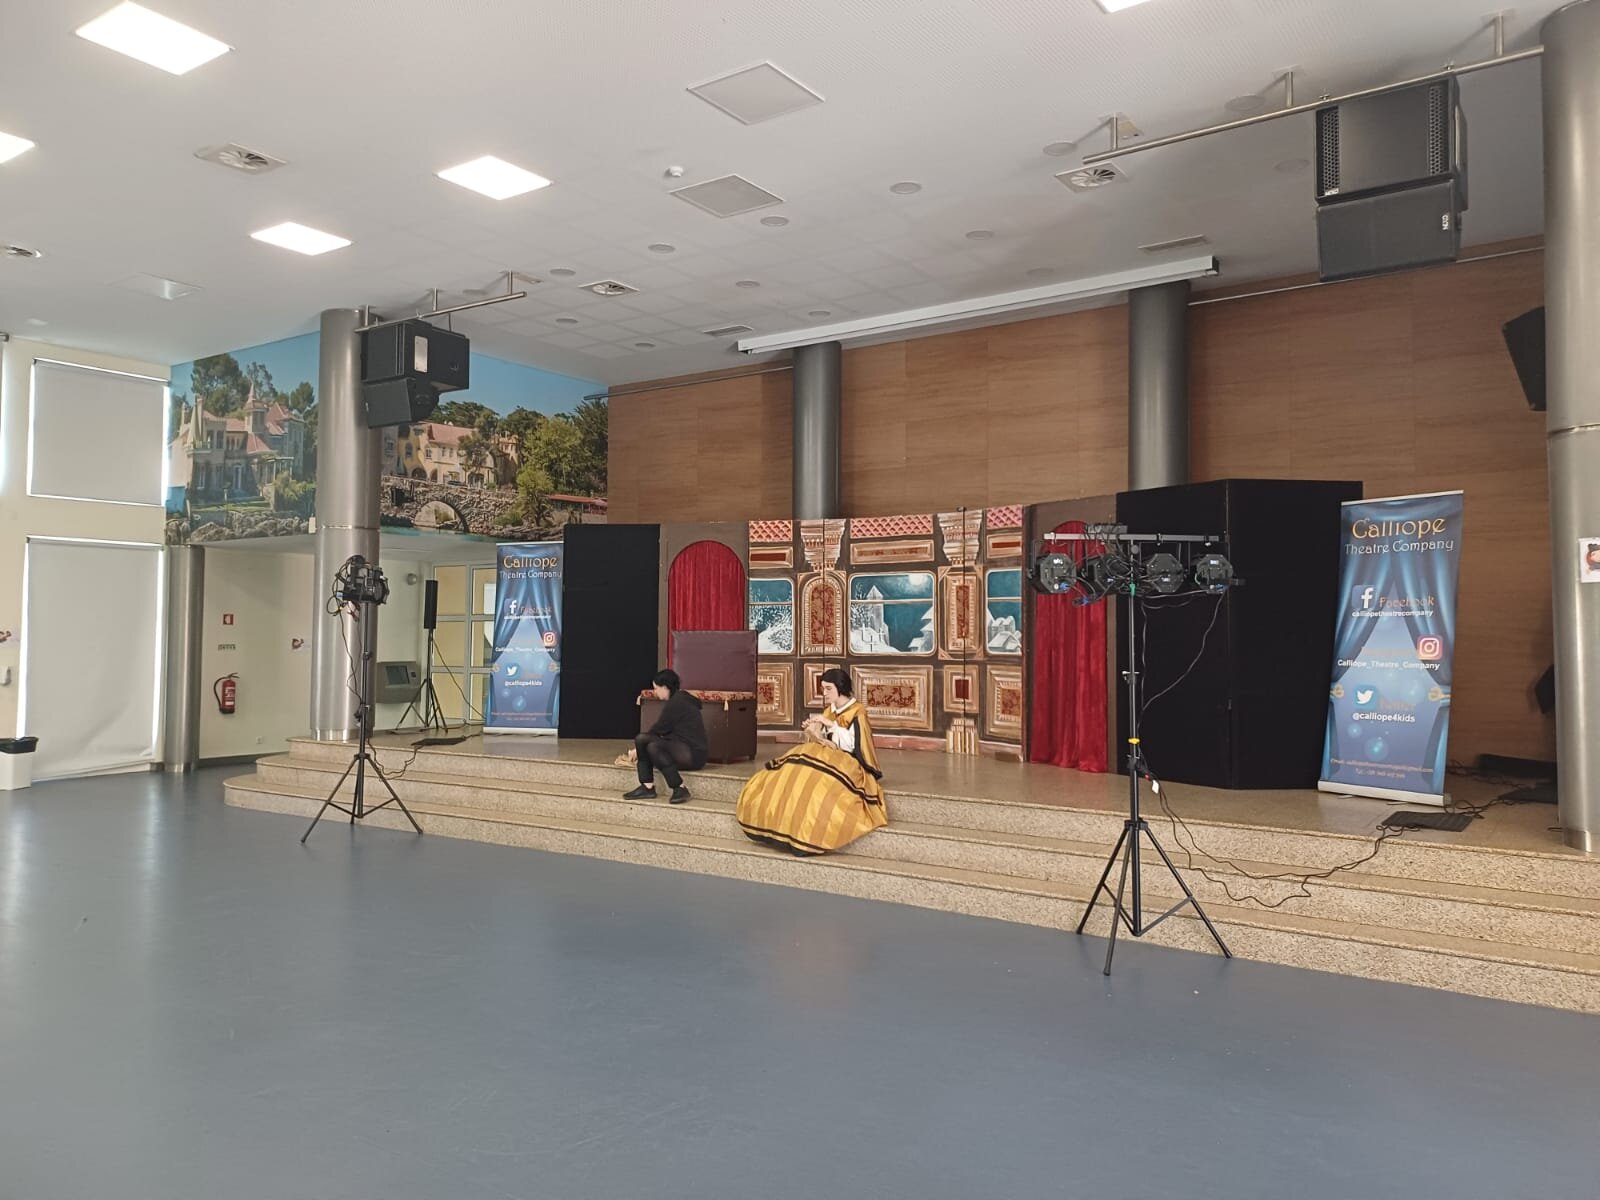 Second in our series of performance spaces! We don't need to be in a theatre or auditorium space: we can also set up in catinas, gymnasiums, or multipurpose rooms. We bring our own lights, sound, and sets, so your students can get that 'theatre feel'